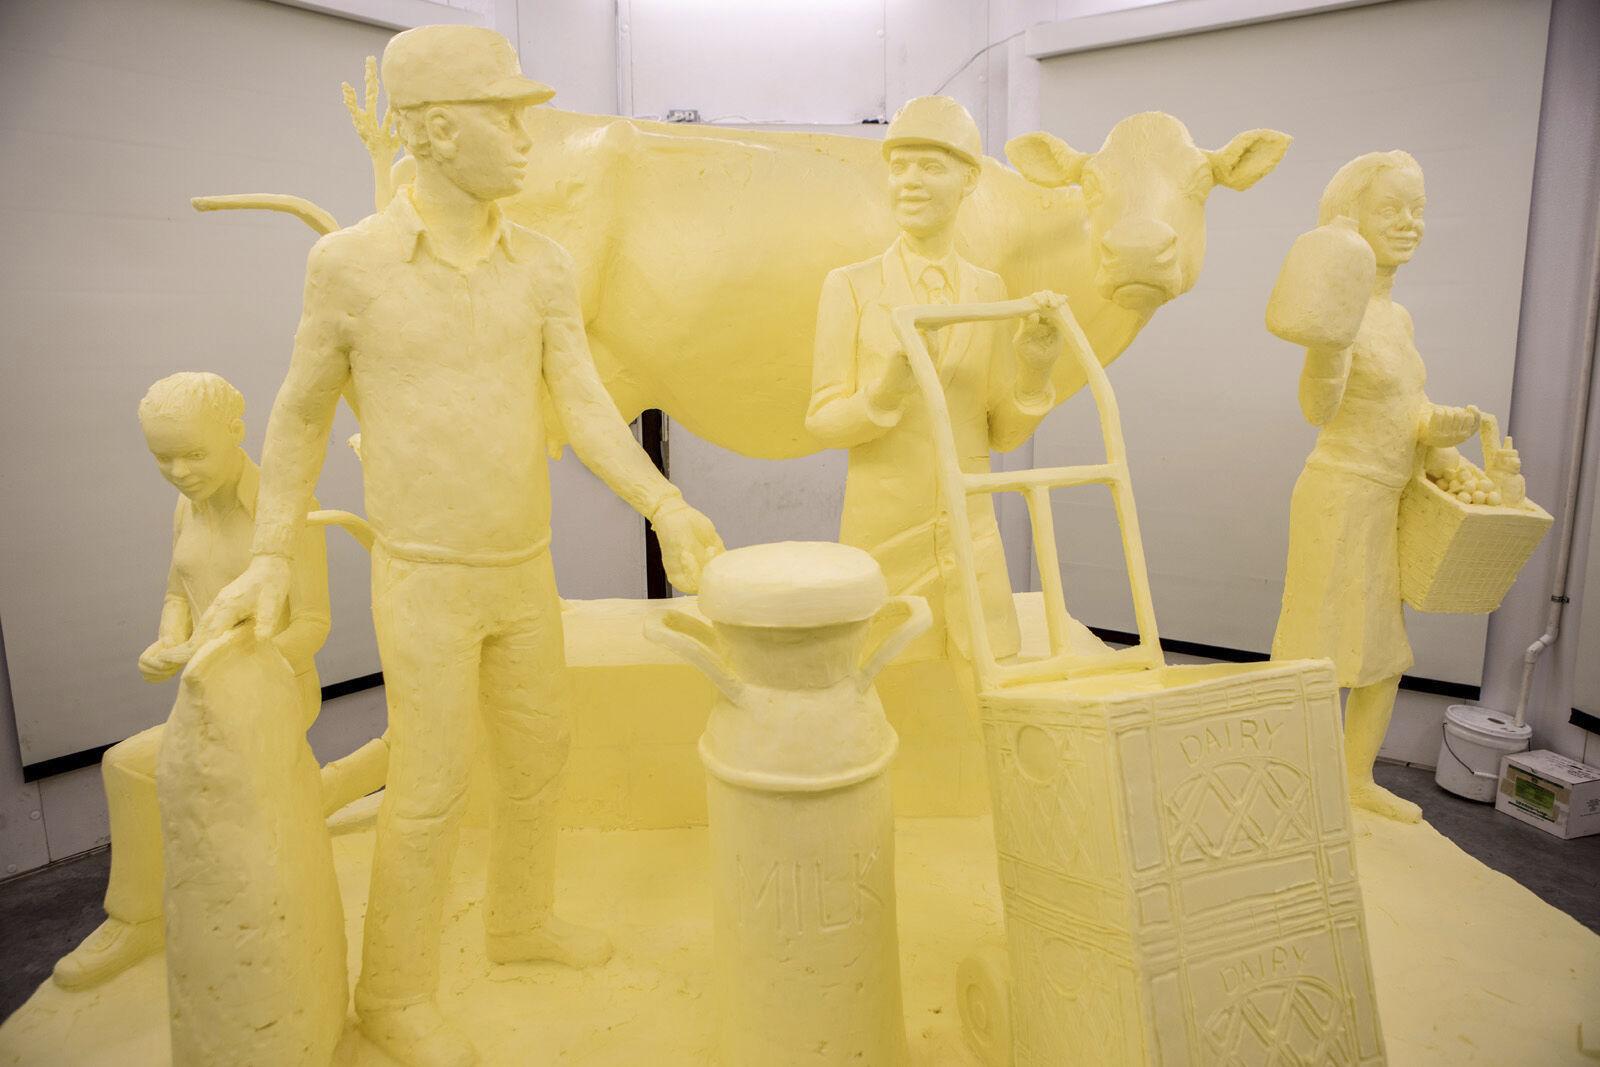 30 photos of past state fair butter sculptures Food and Cooking jg